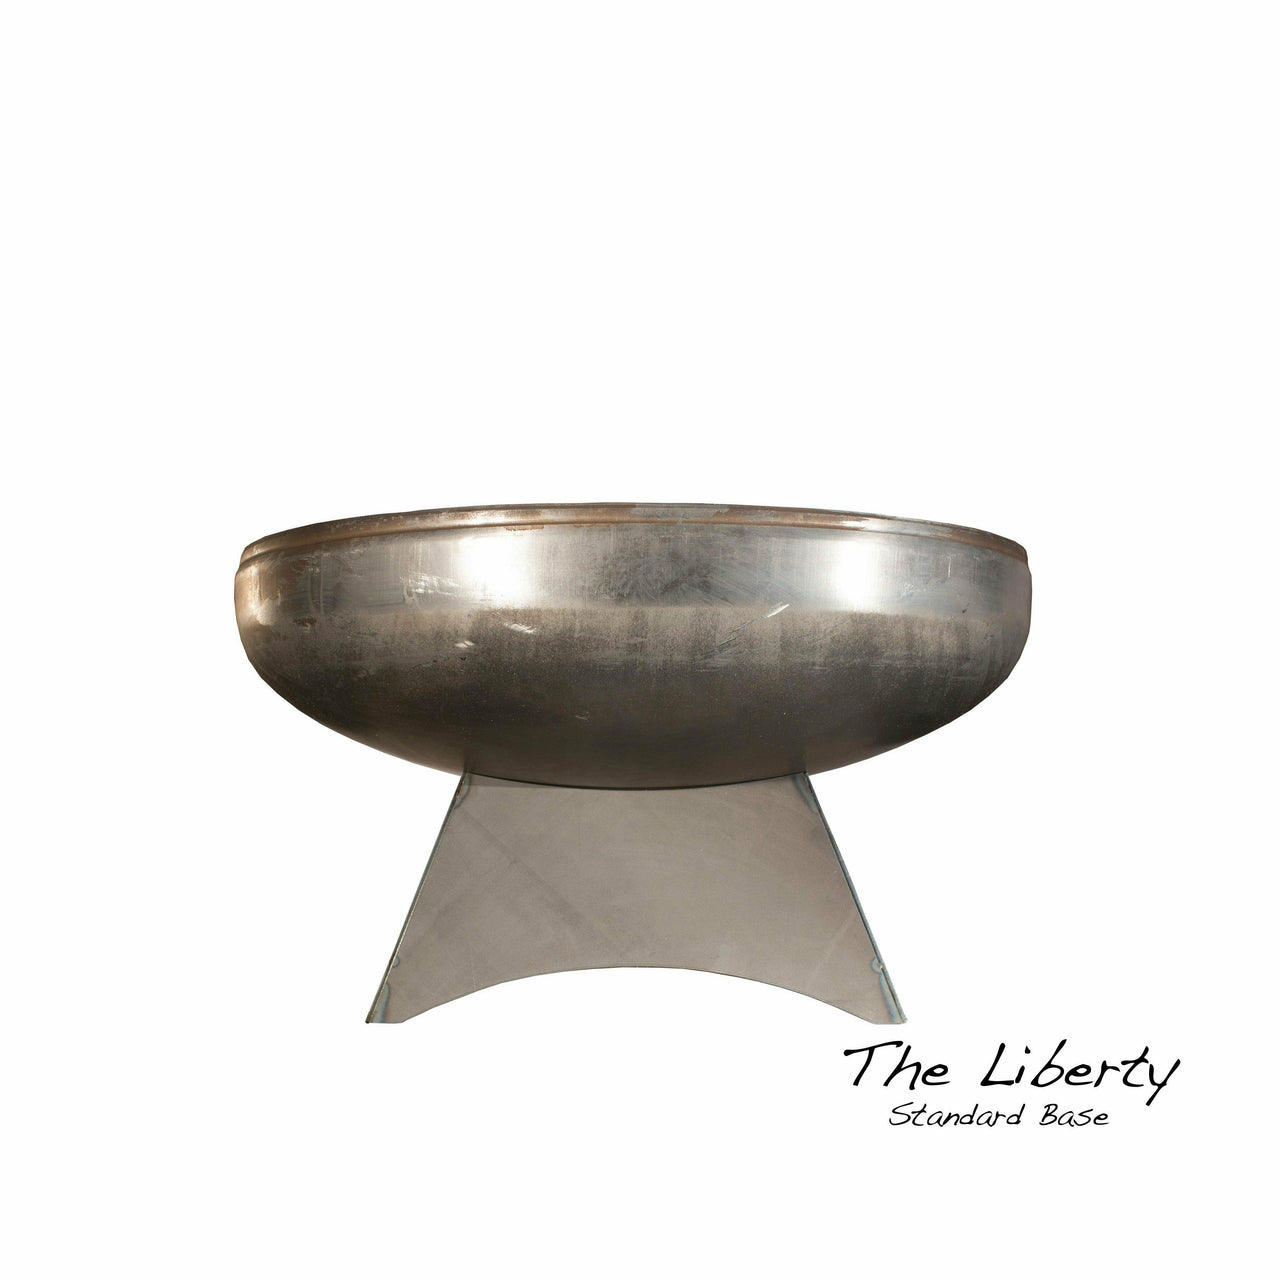 Ohio Flame Liberty Fire Pit with Standard Base - Fire Pit Stock